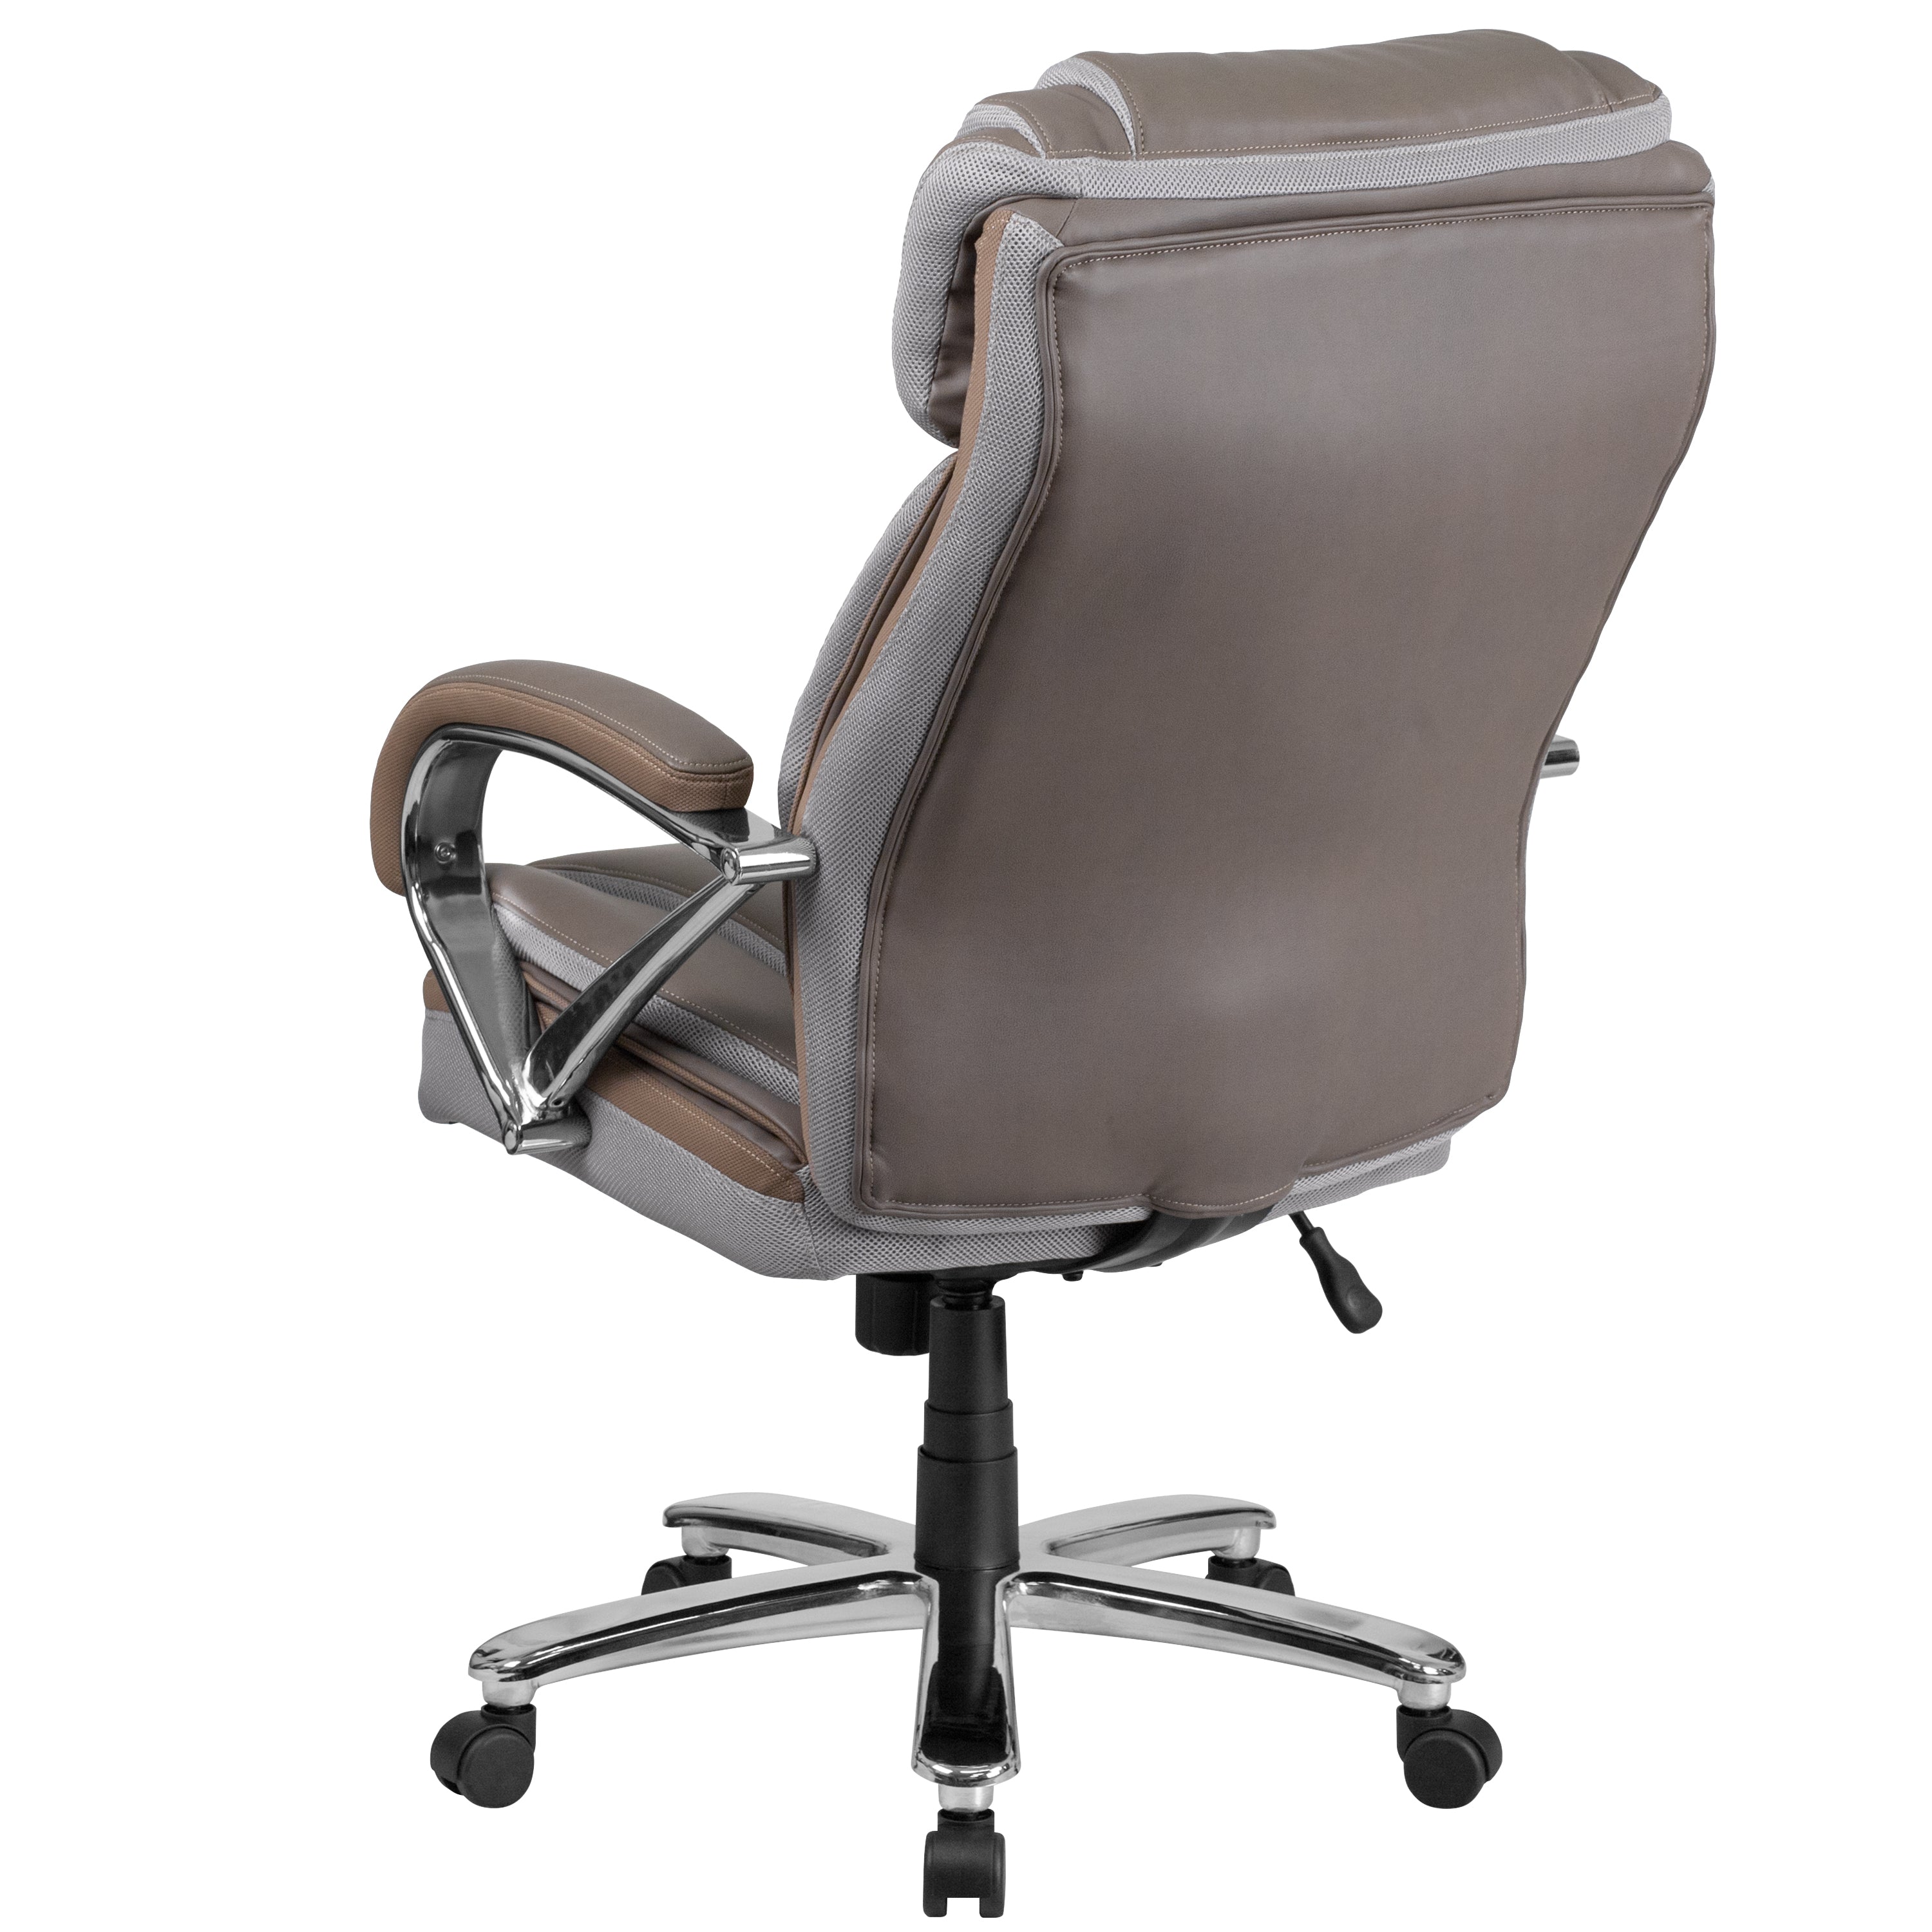 Hercules 500 LB. Capacity Big & Tall Taupe Leather Office Chair